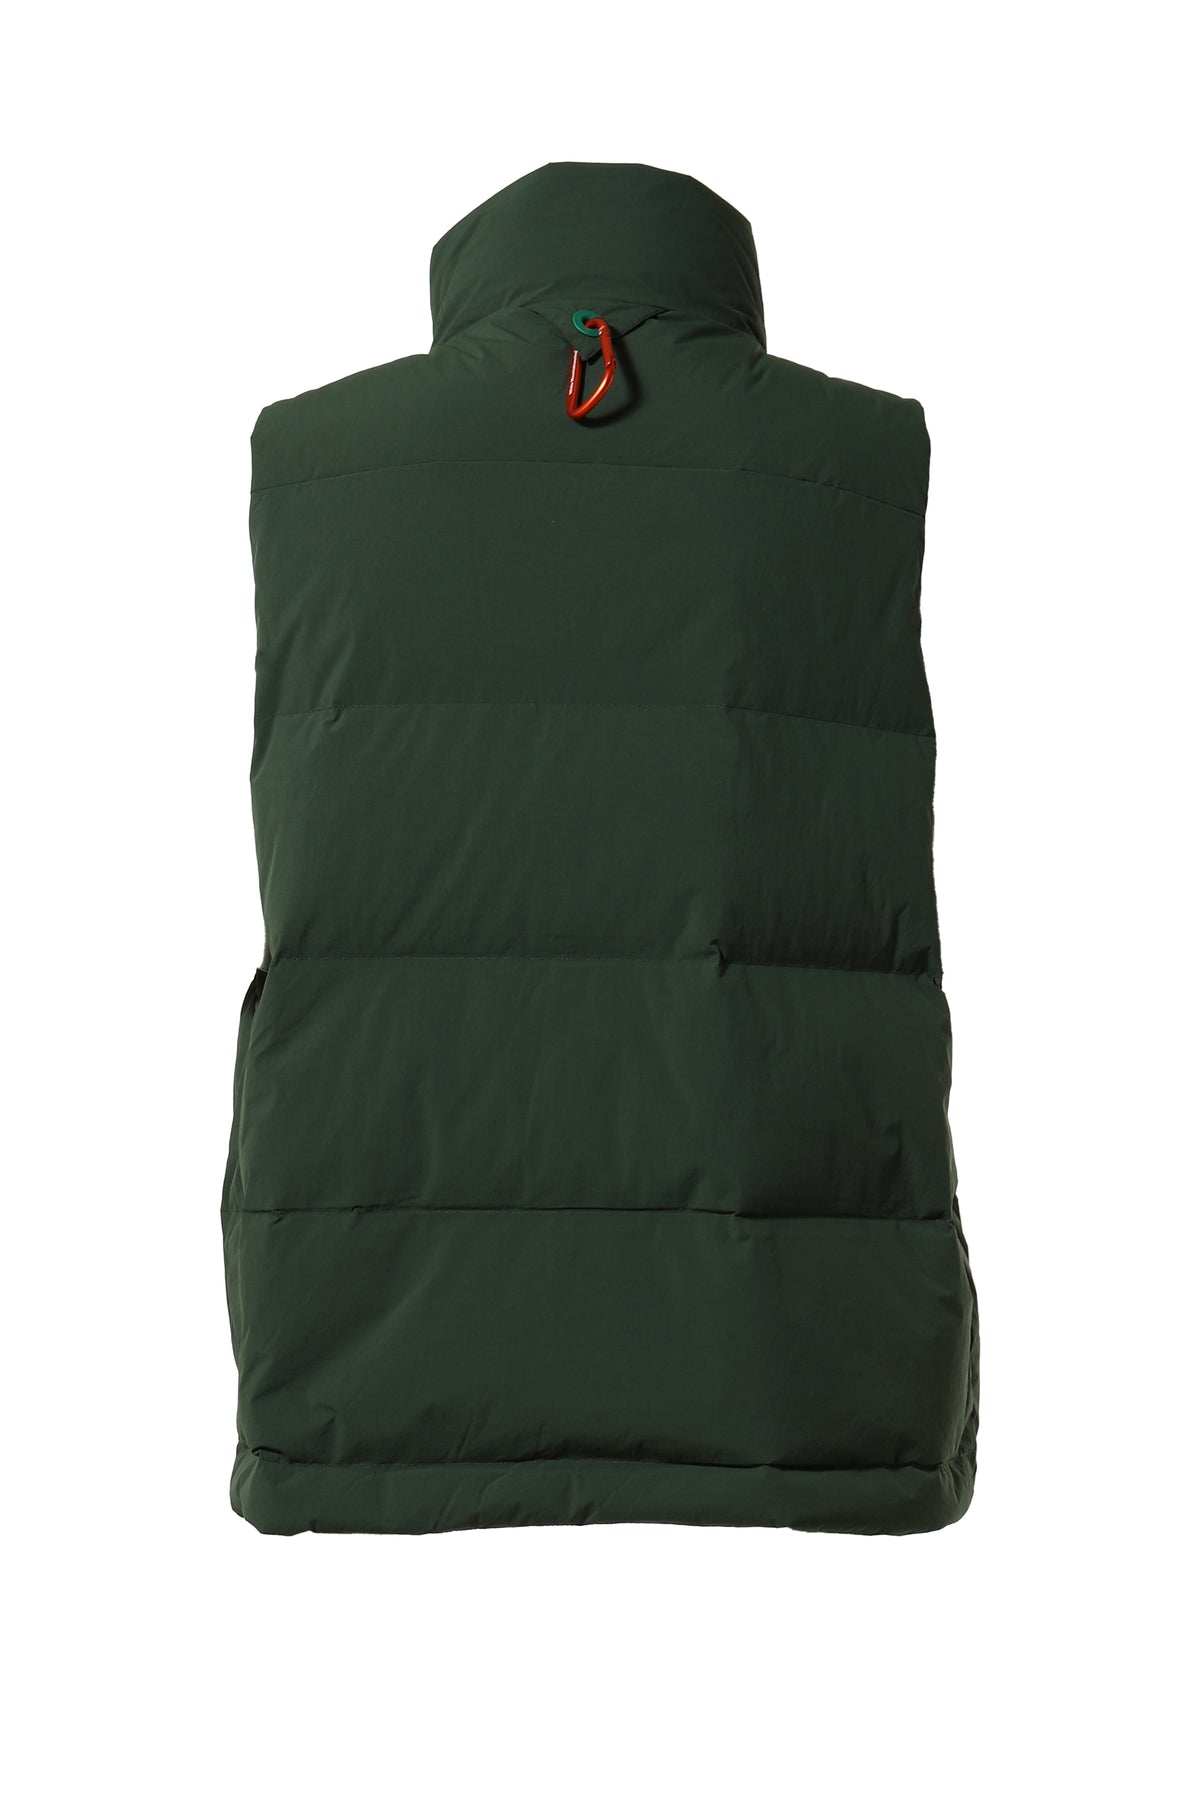 White Mountaineering × TAION WM×TAION DOWN VEST / GRN